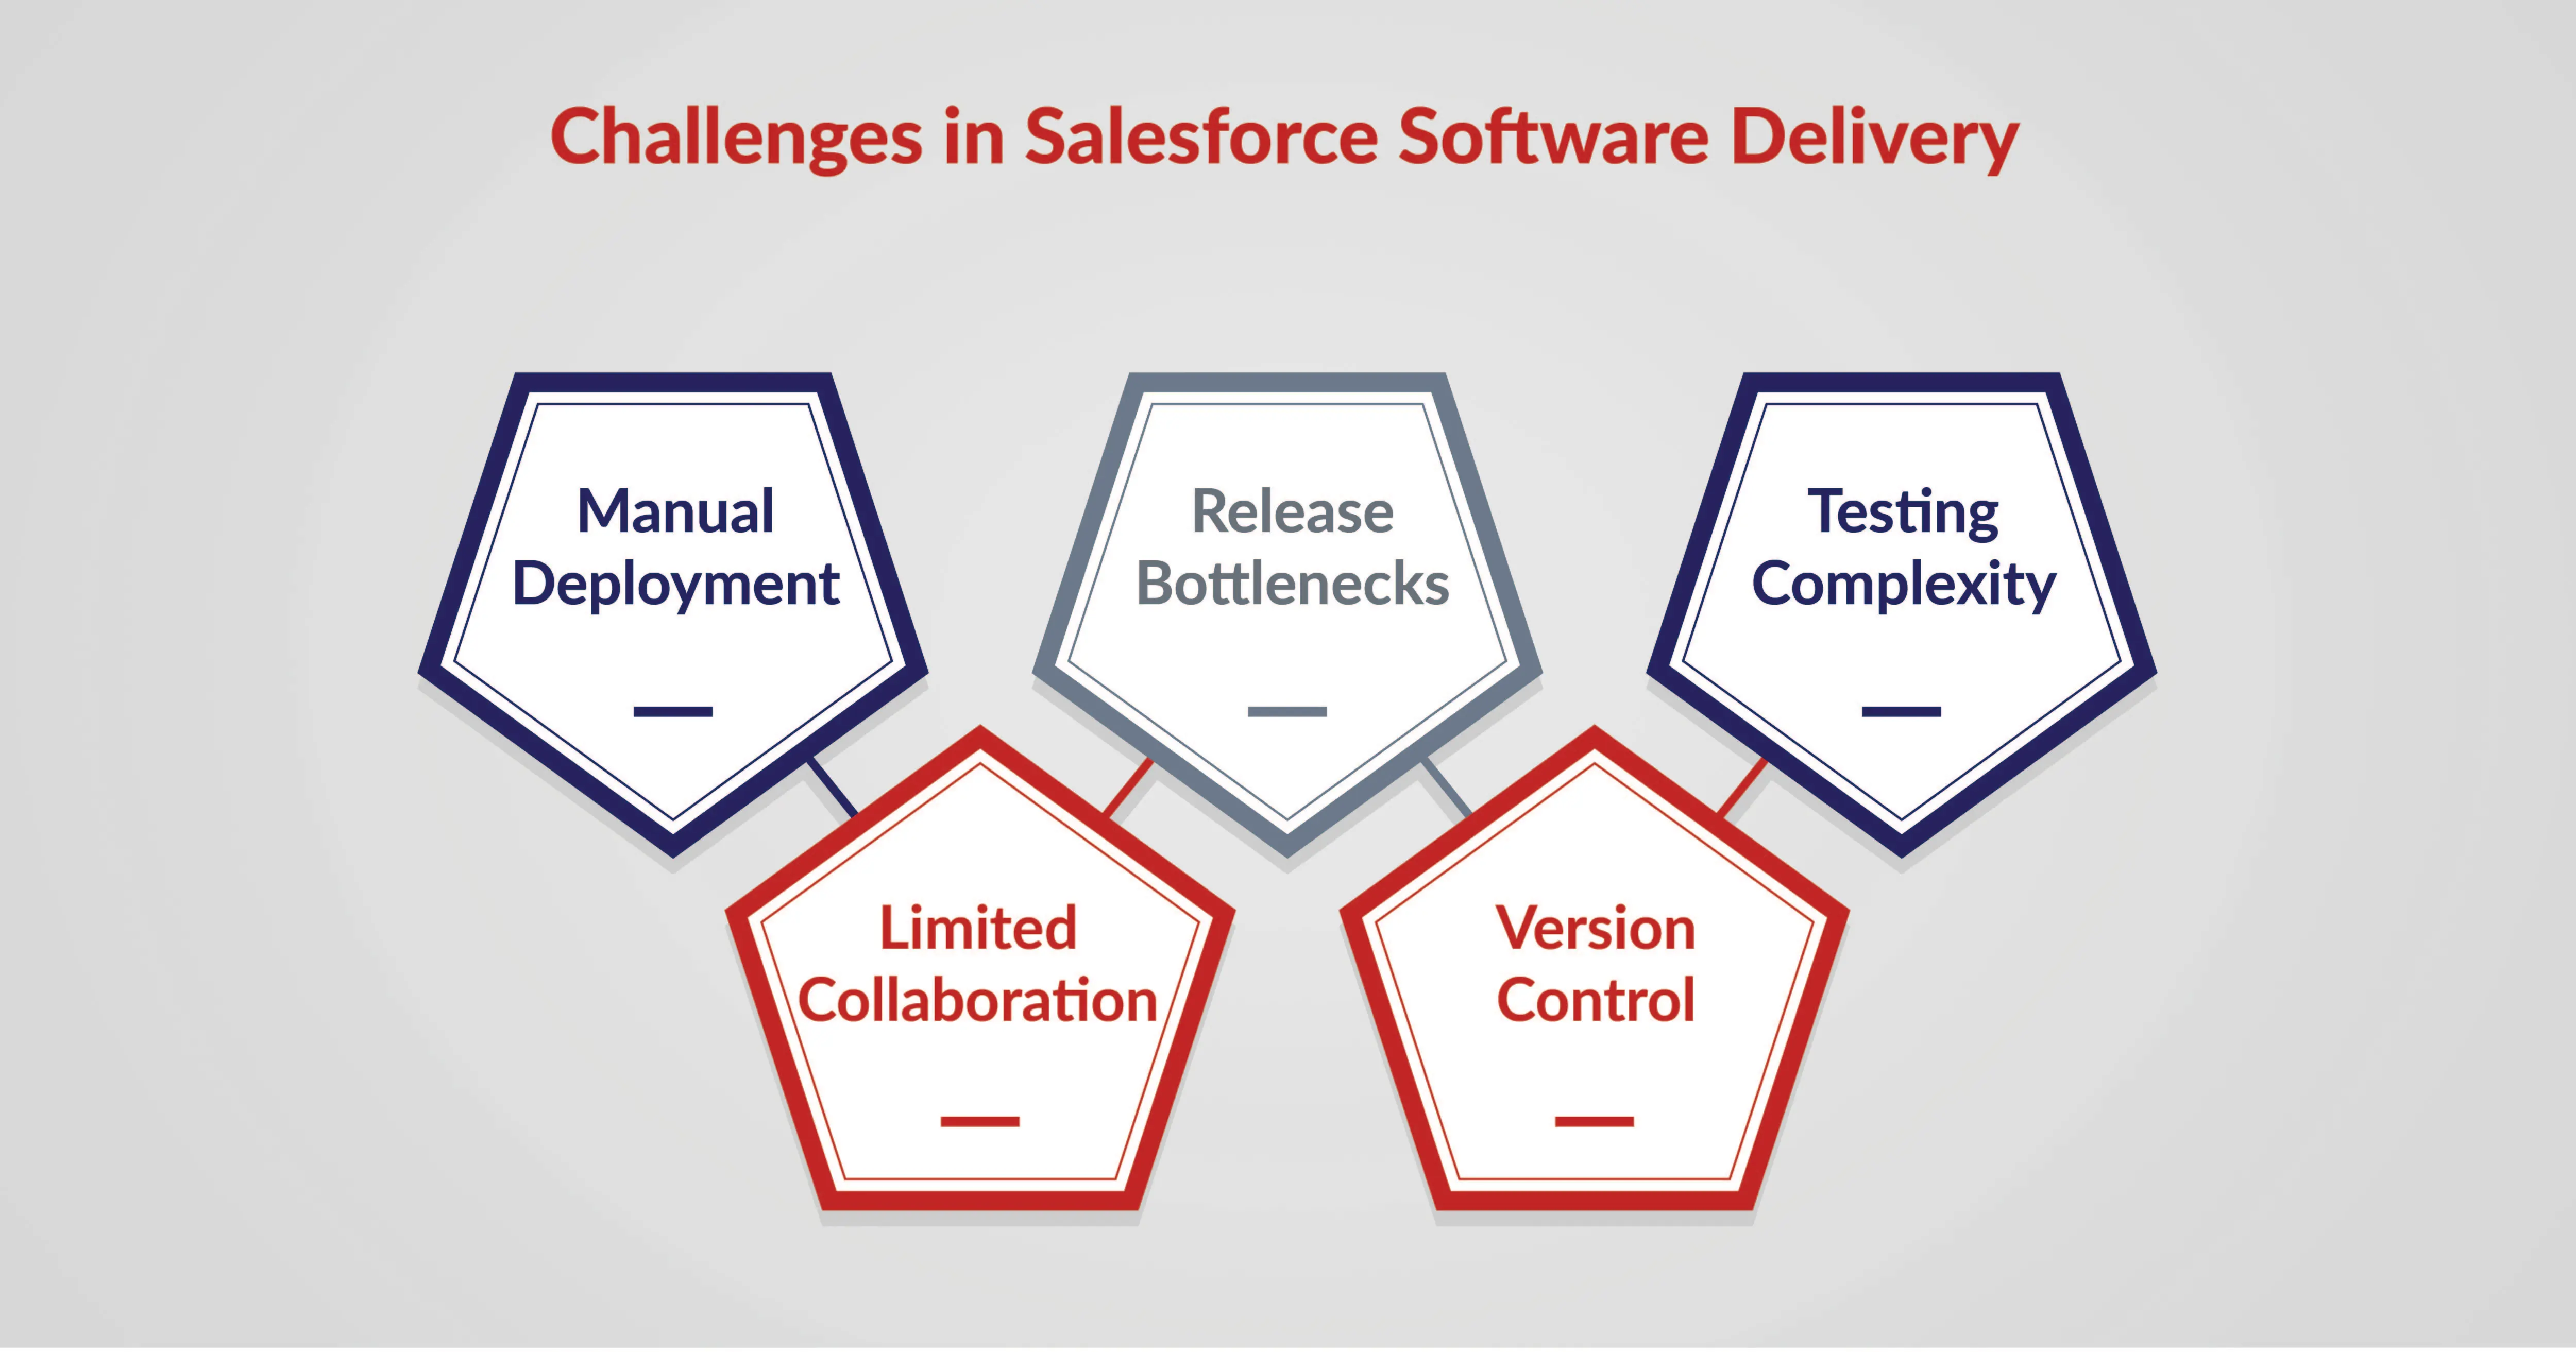 Challenges in Salesforce Software Delivery